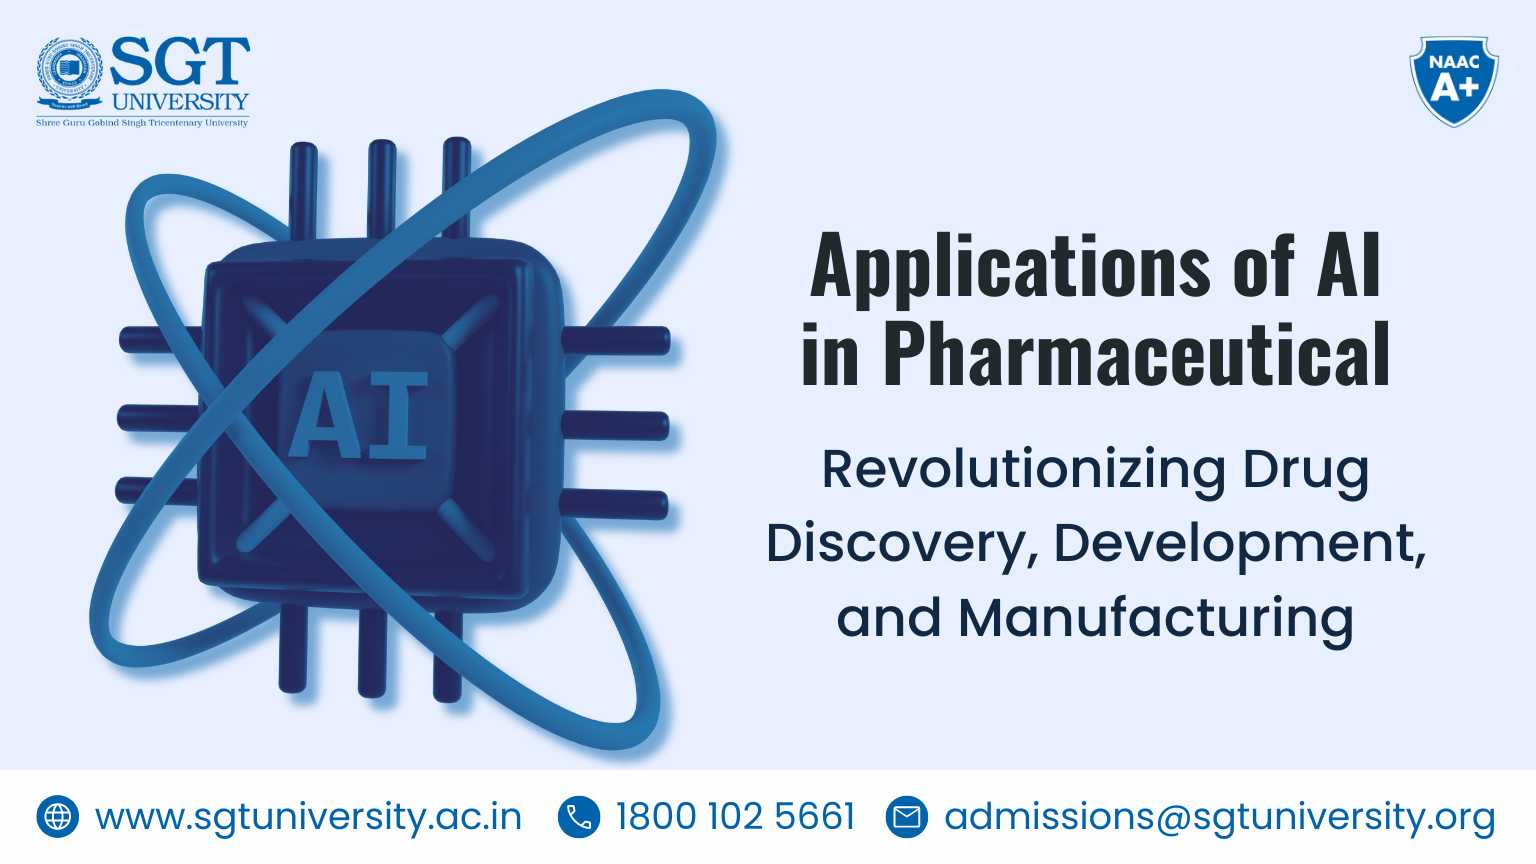 Applications of Artificial Intelligence in the Pharmaceutical Industry and Research